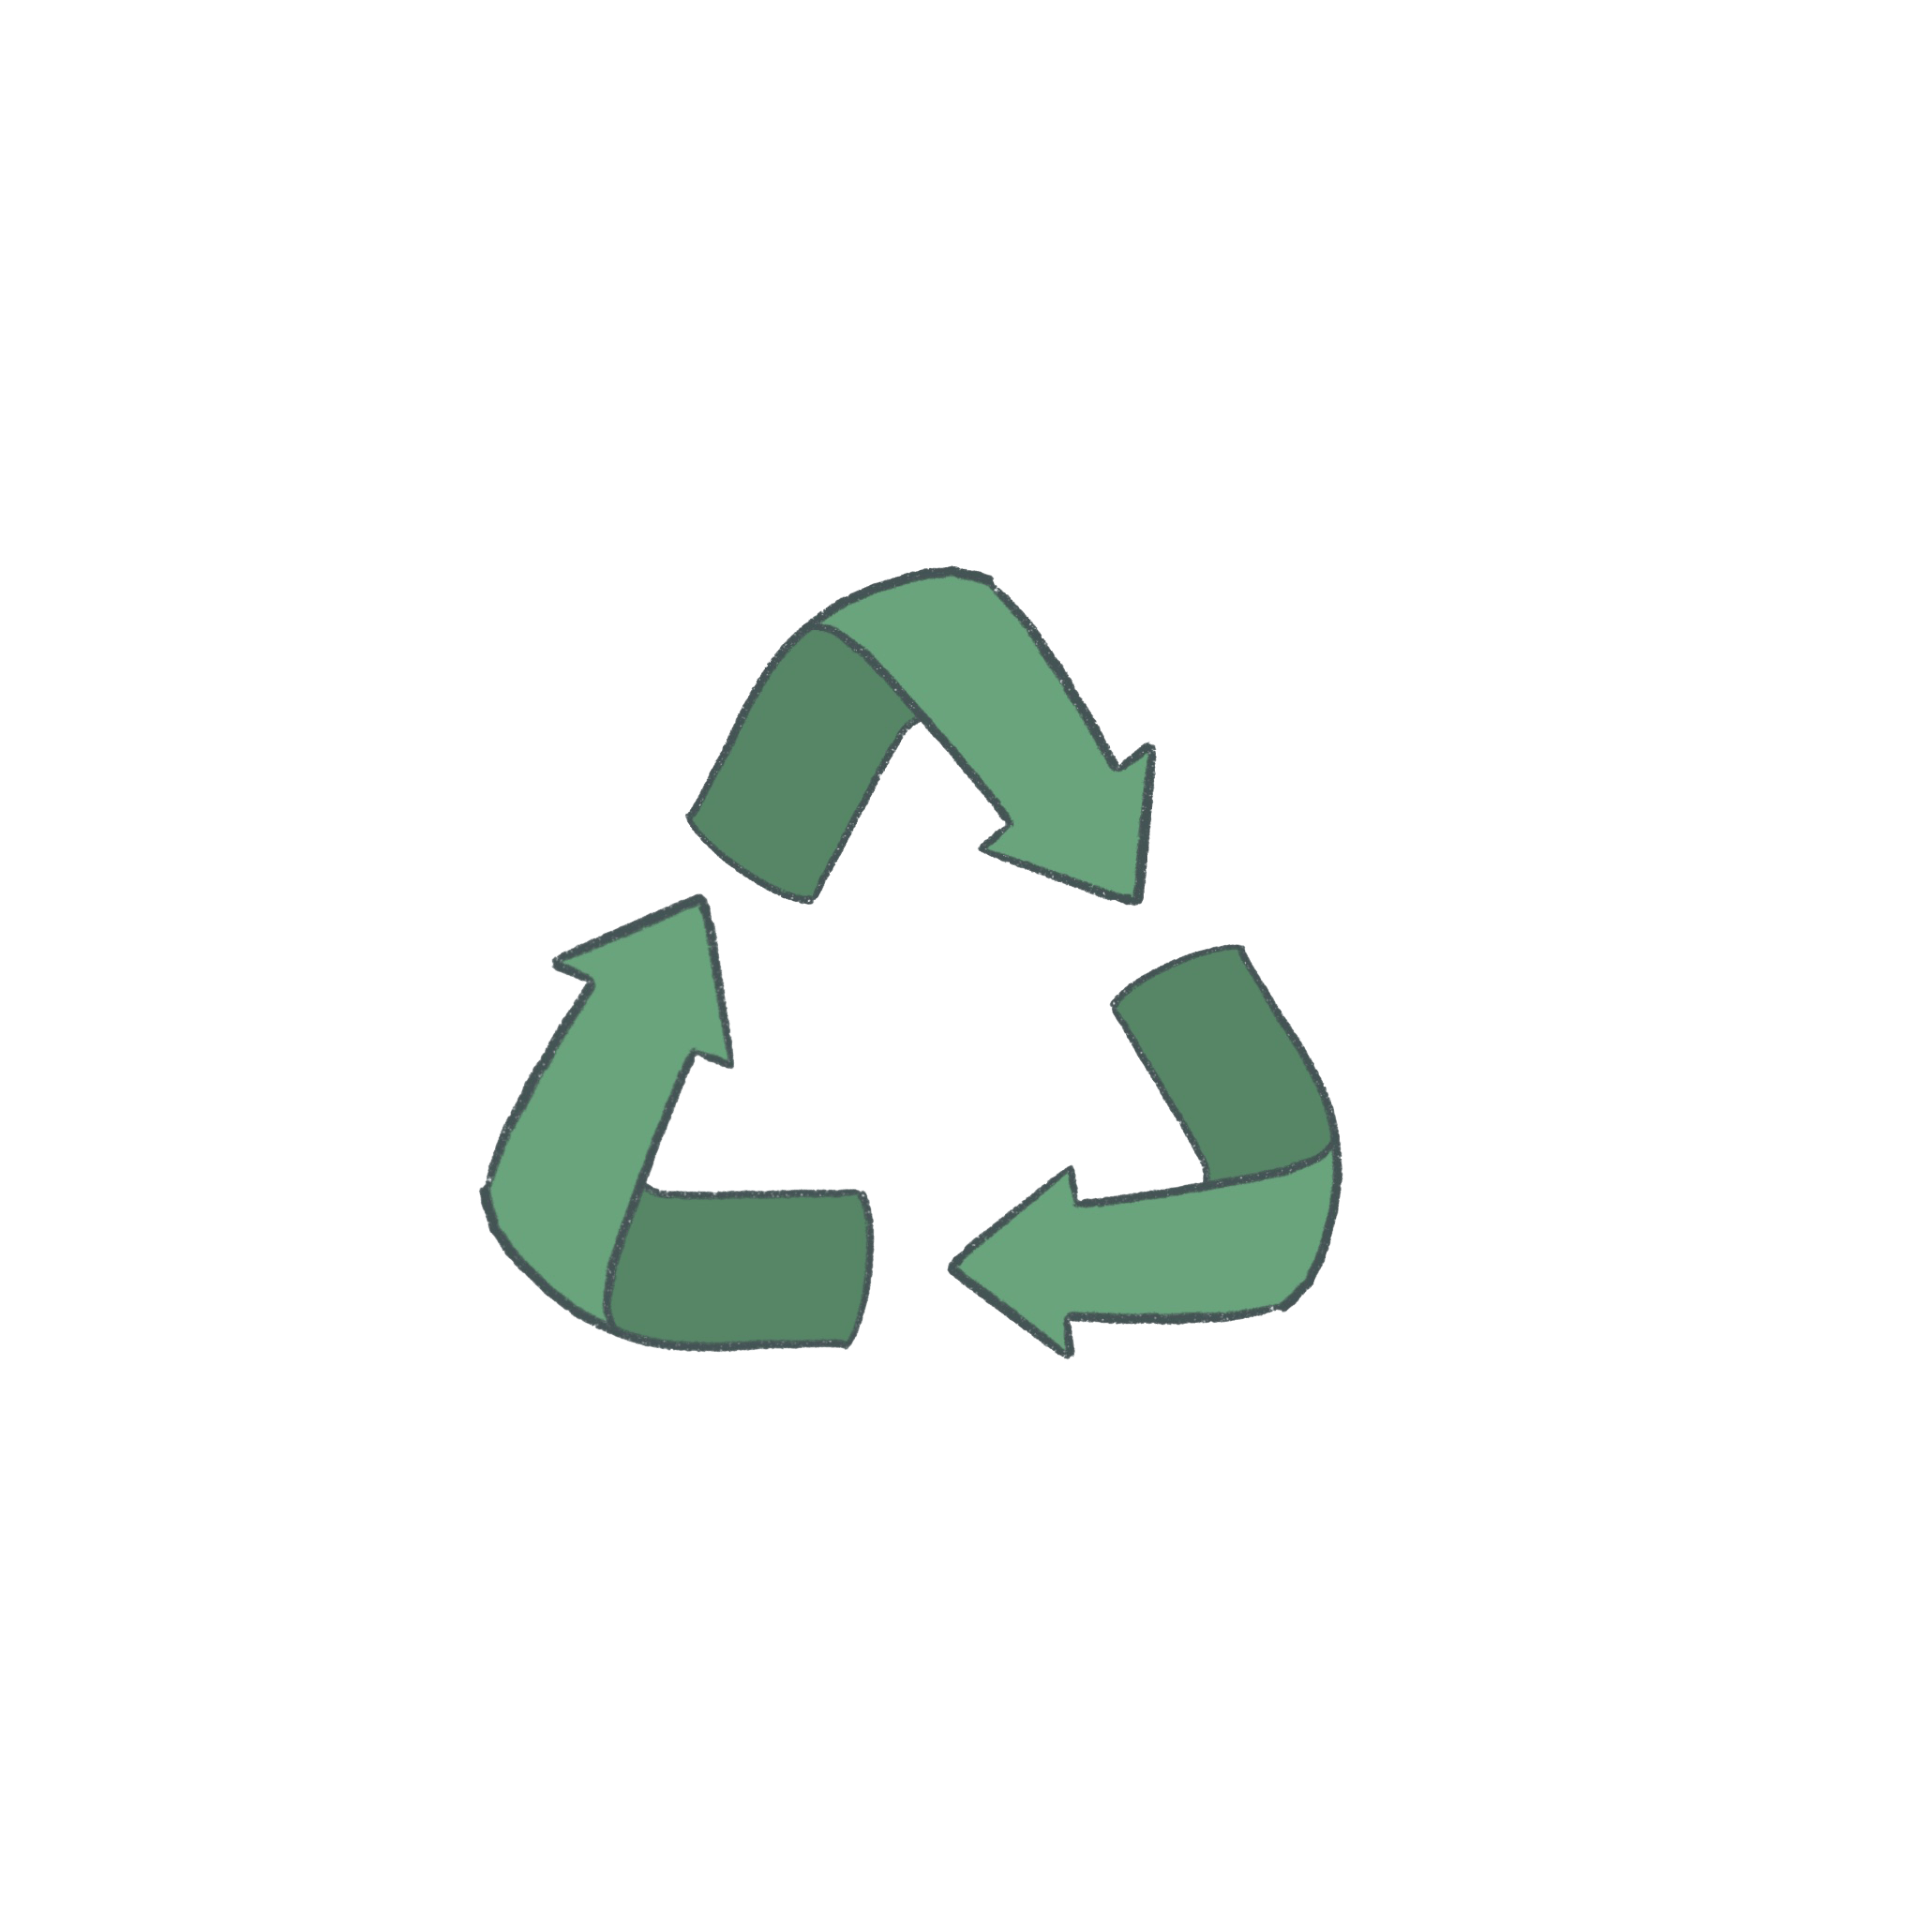 Image of a recycling logo, three green arrows in the shape of a triangle